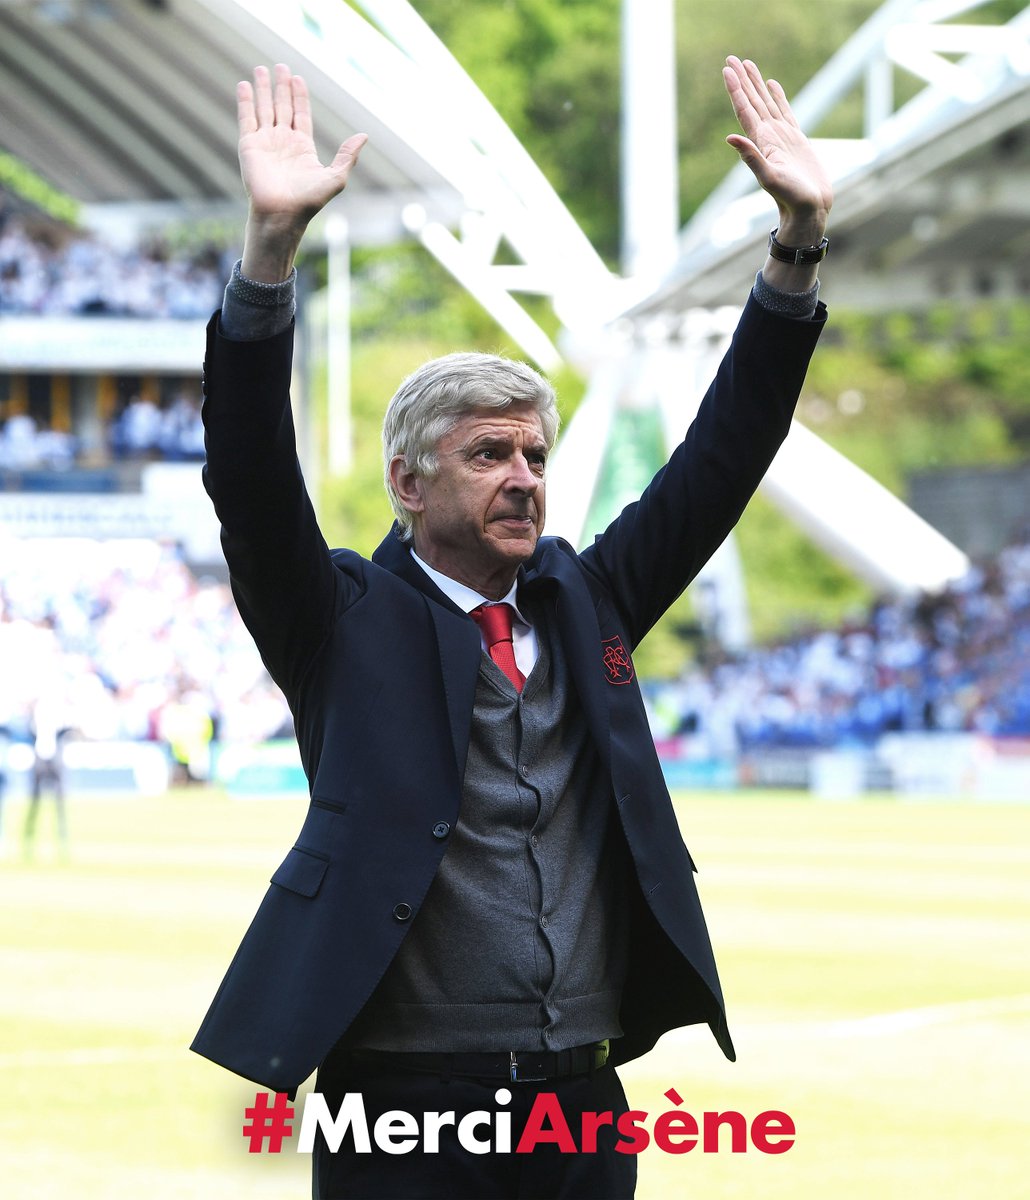 What an emotional day it's been...

For 7,895 days, Arsène Wenger has been our manager - how are you feeling right now?

#MerciArsène